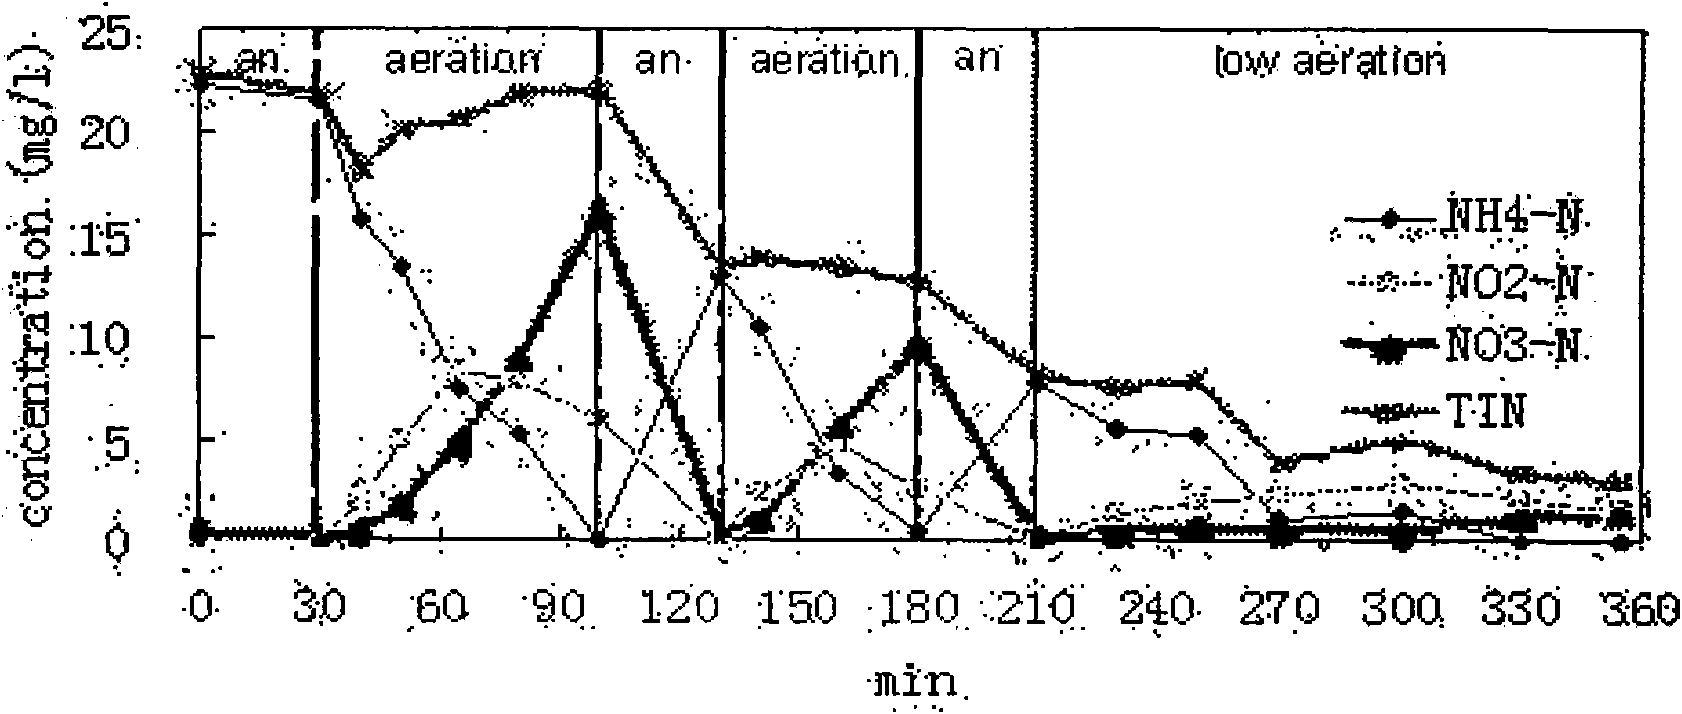 Method for efficiently denitriding aerobic granular sludge by combining stepwise water feeding with alternate anaerobic and aerobic treatment